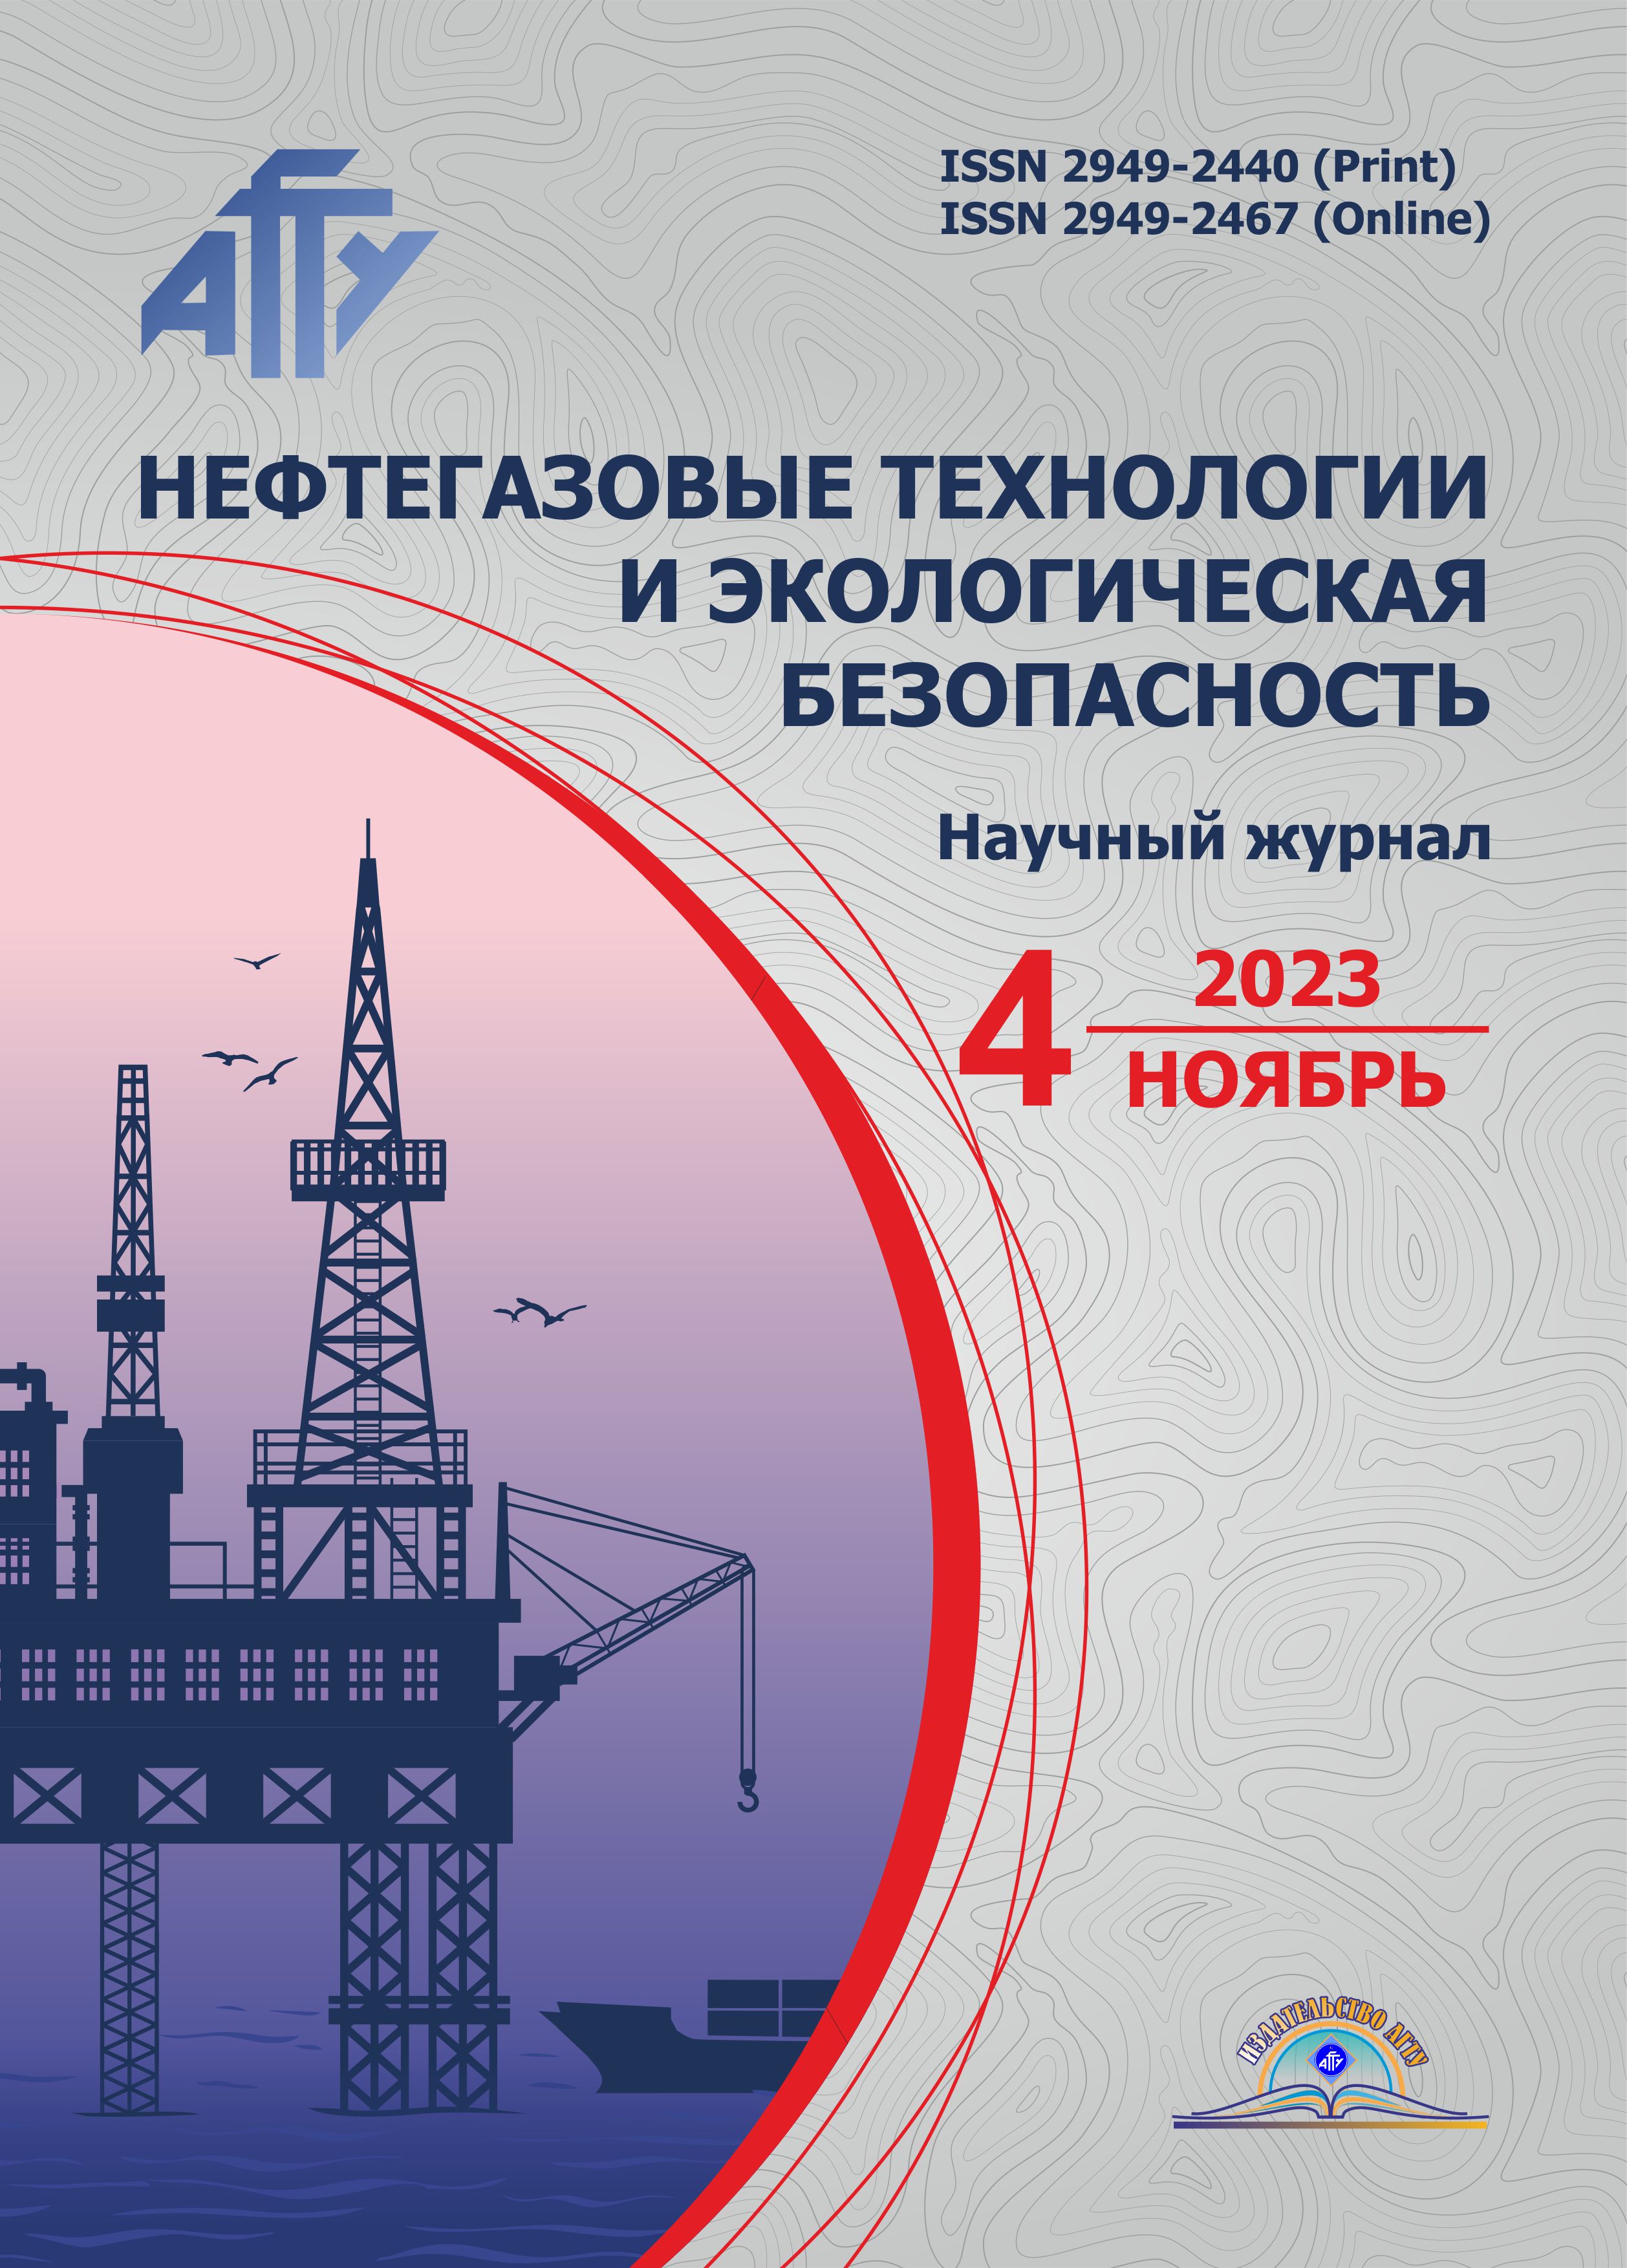                         The industrial environmental control using the example  of a hydrocarbon deposit in the Volgograd region
            